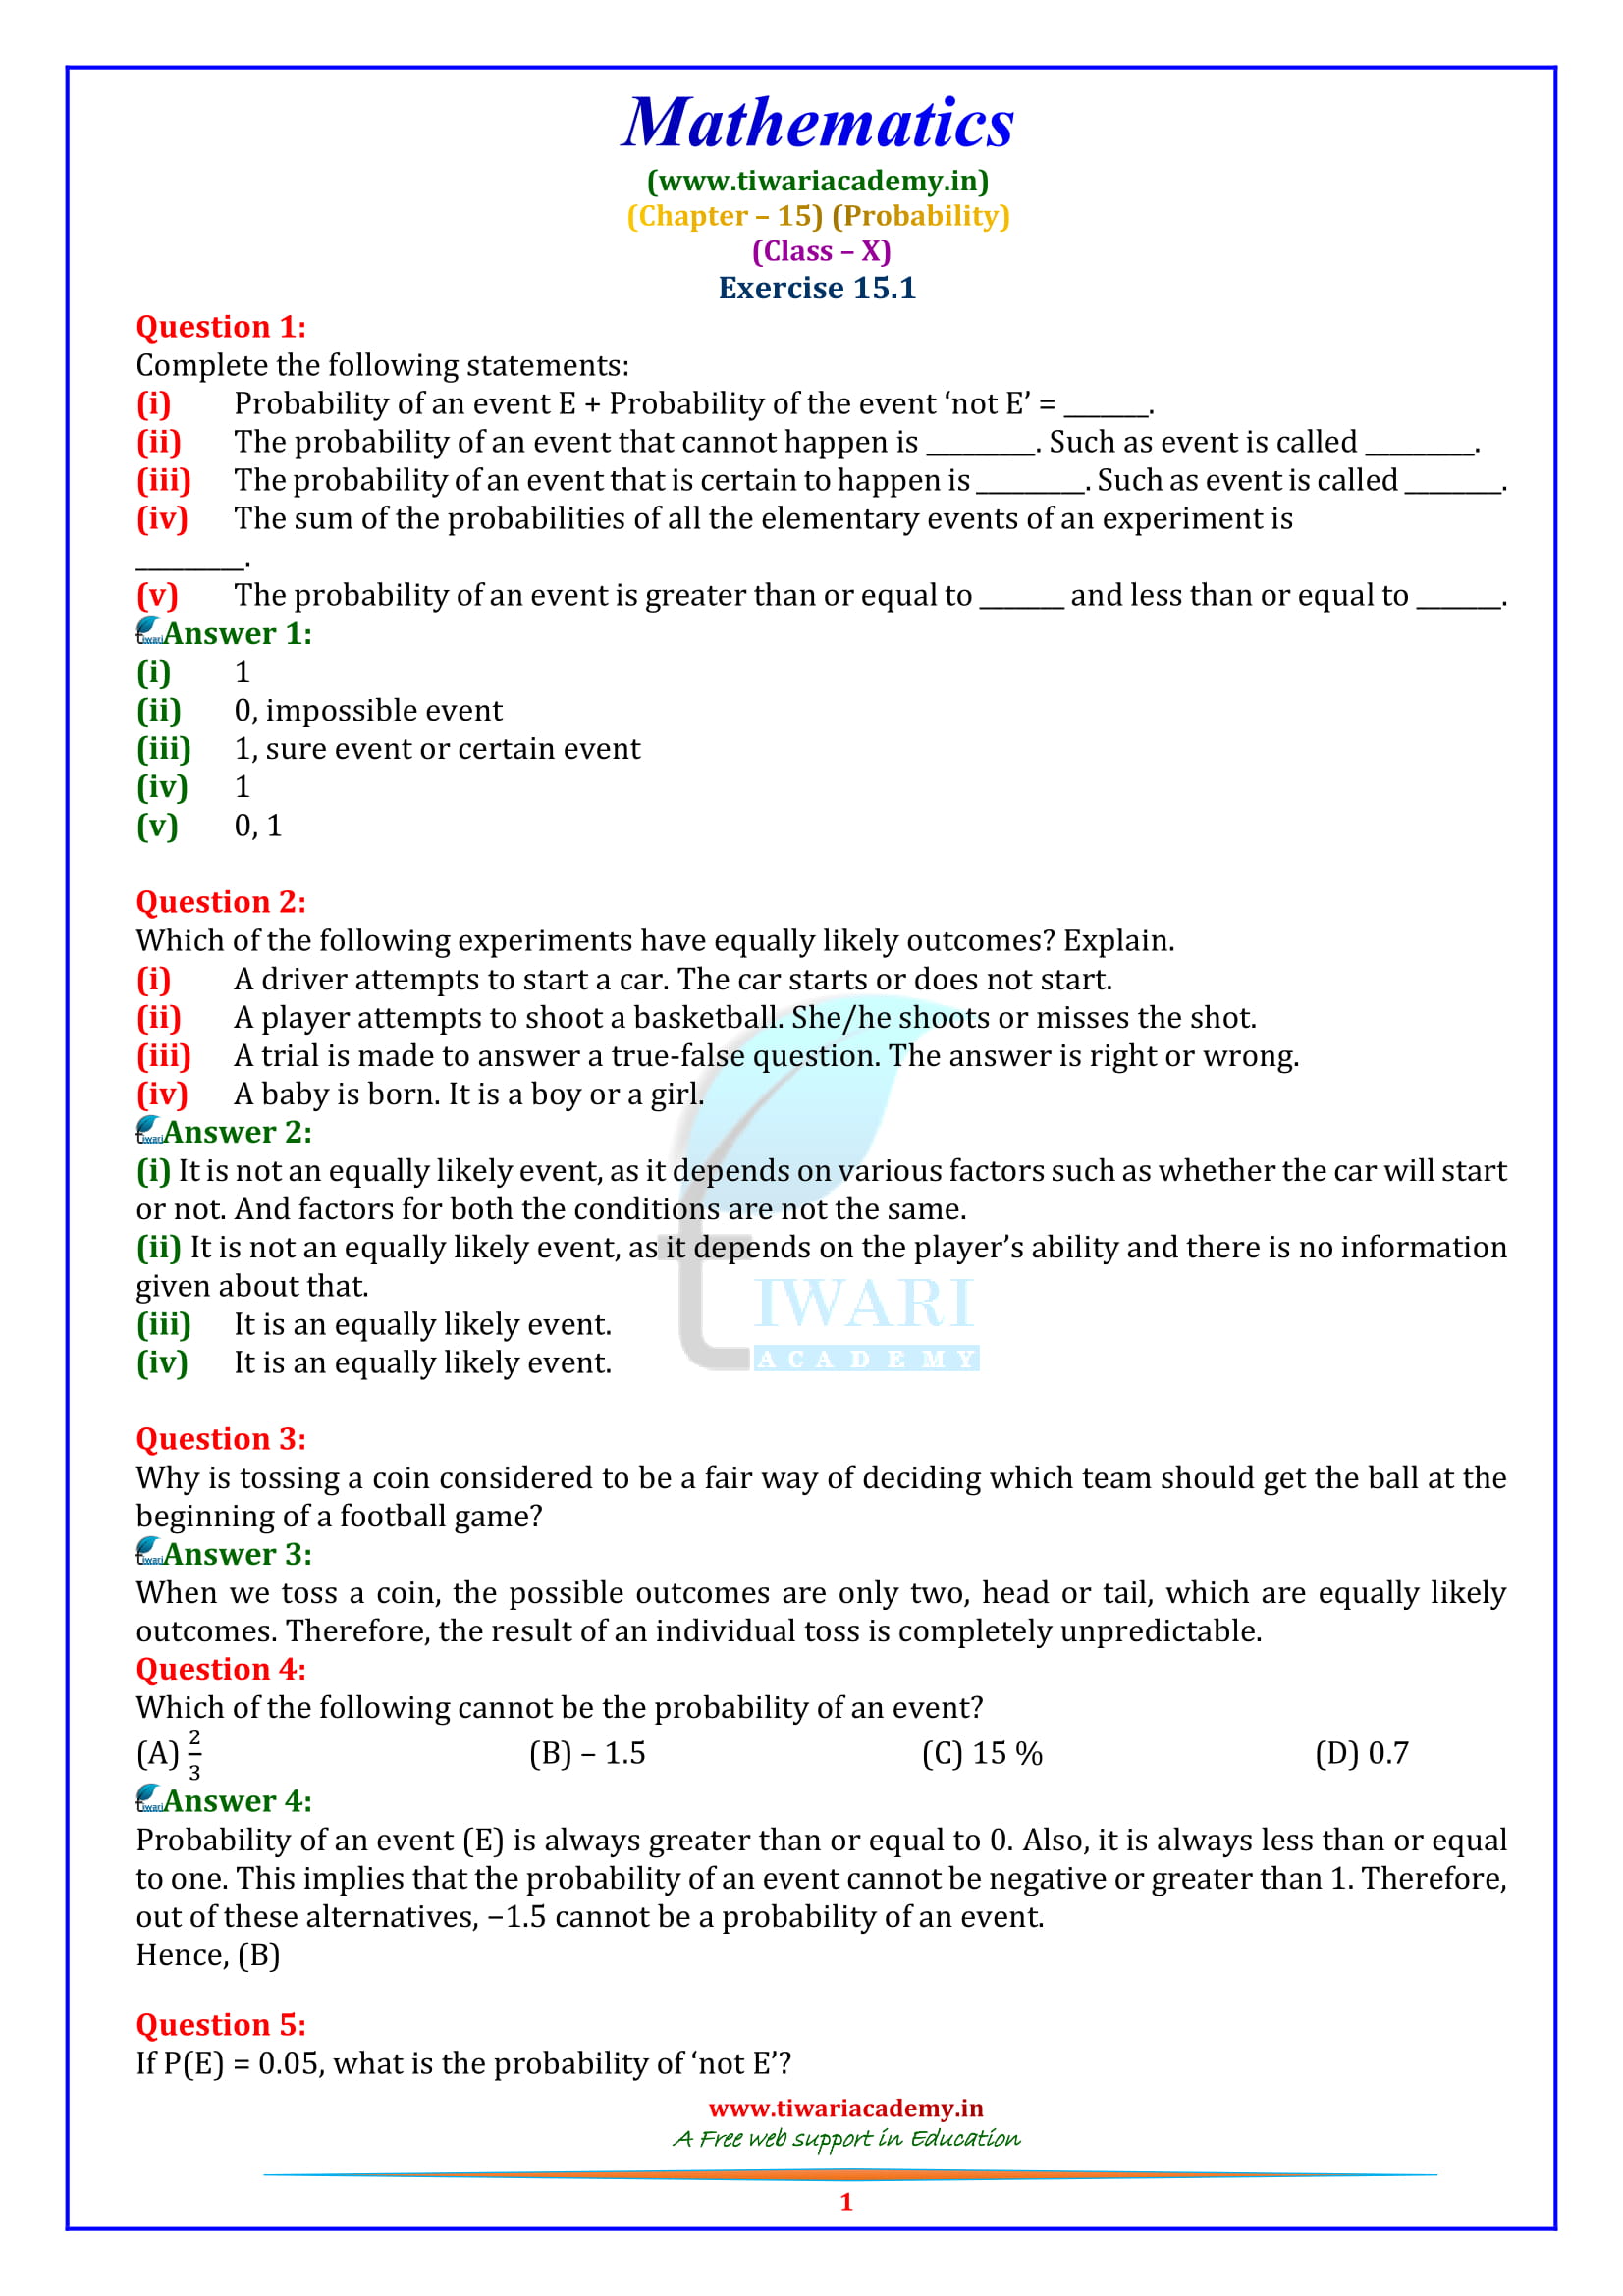 NCERT Solutions for Class 10 Maths Chapter 15 Exercise 15.1 